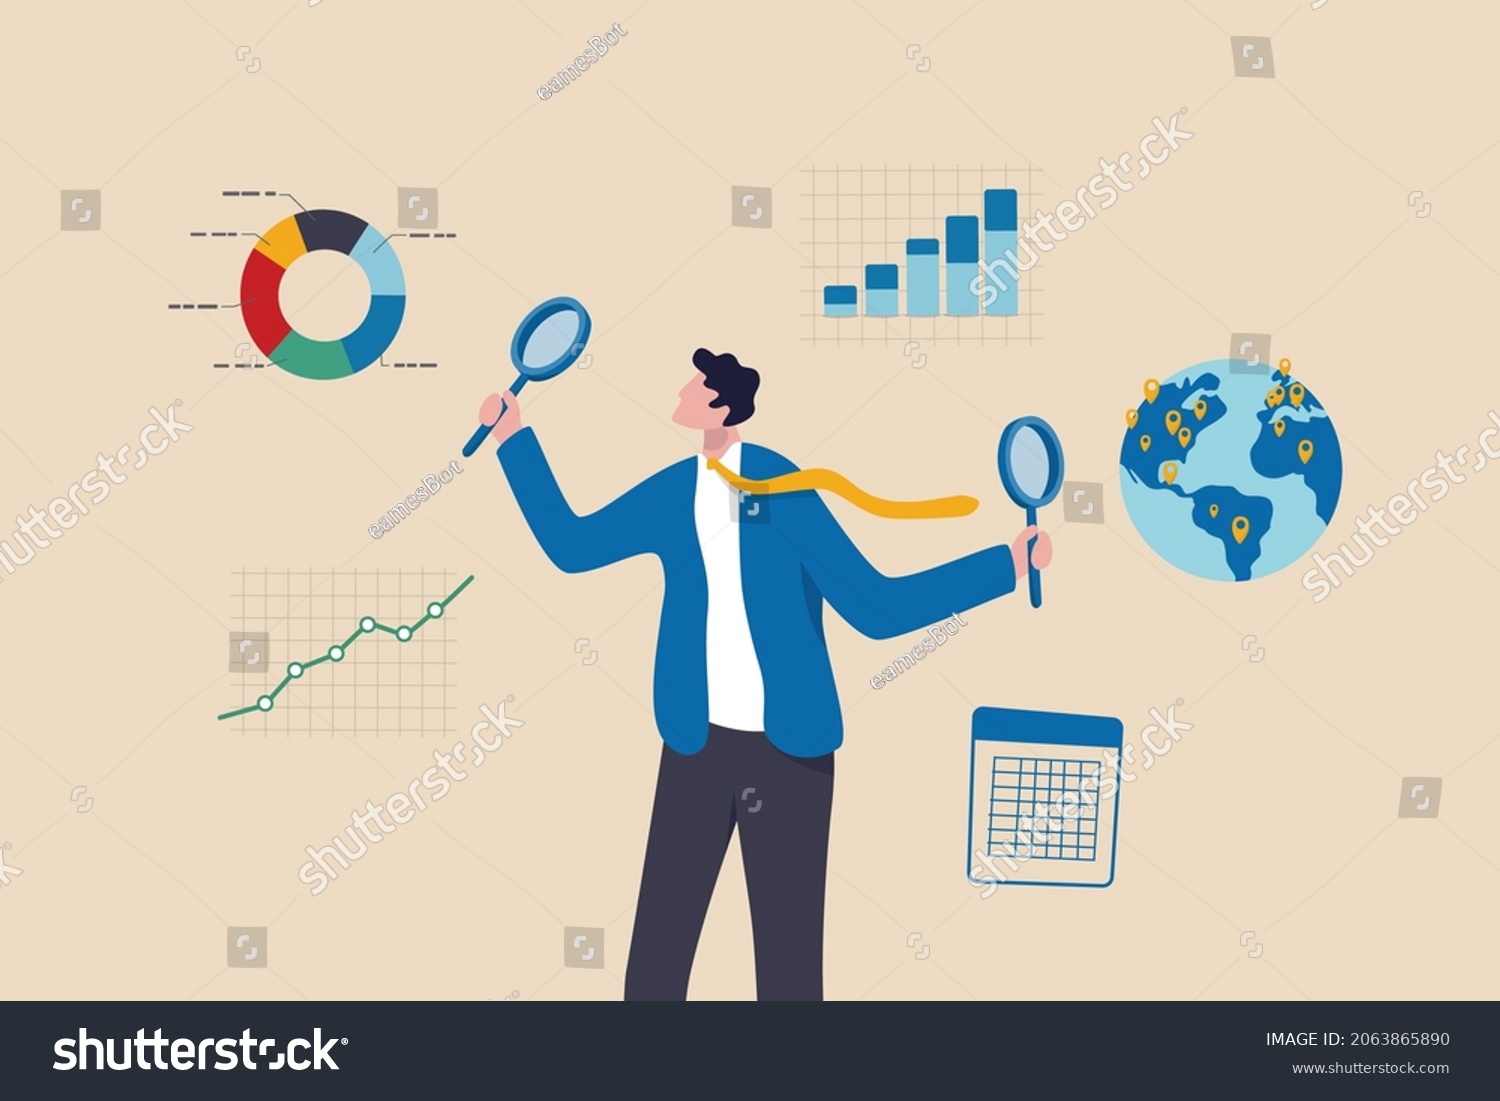 SVG of Business analysis, calculate or research for market growth, financial report, investment data or sale information concept, smart businessman analyst holding magnifying glass analyze graph and chart. svg